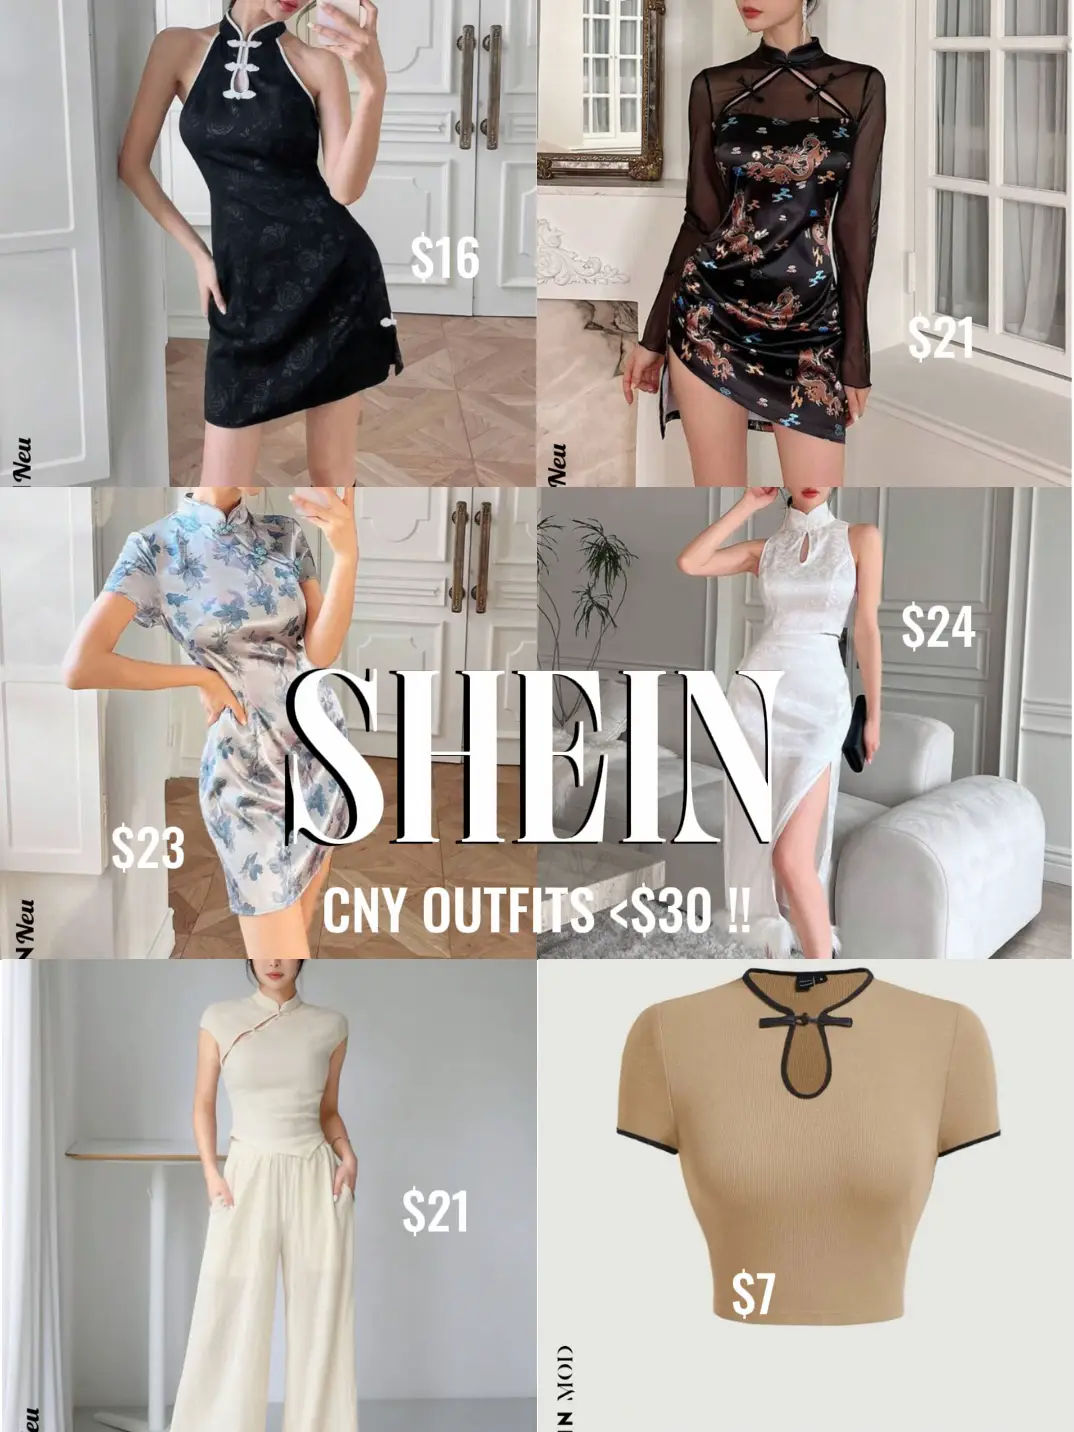 Cheetah Reviews - Singapore General Clothing & Others - TheSmartLocal  Reviews